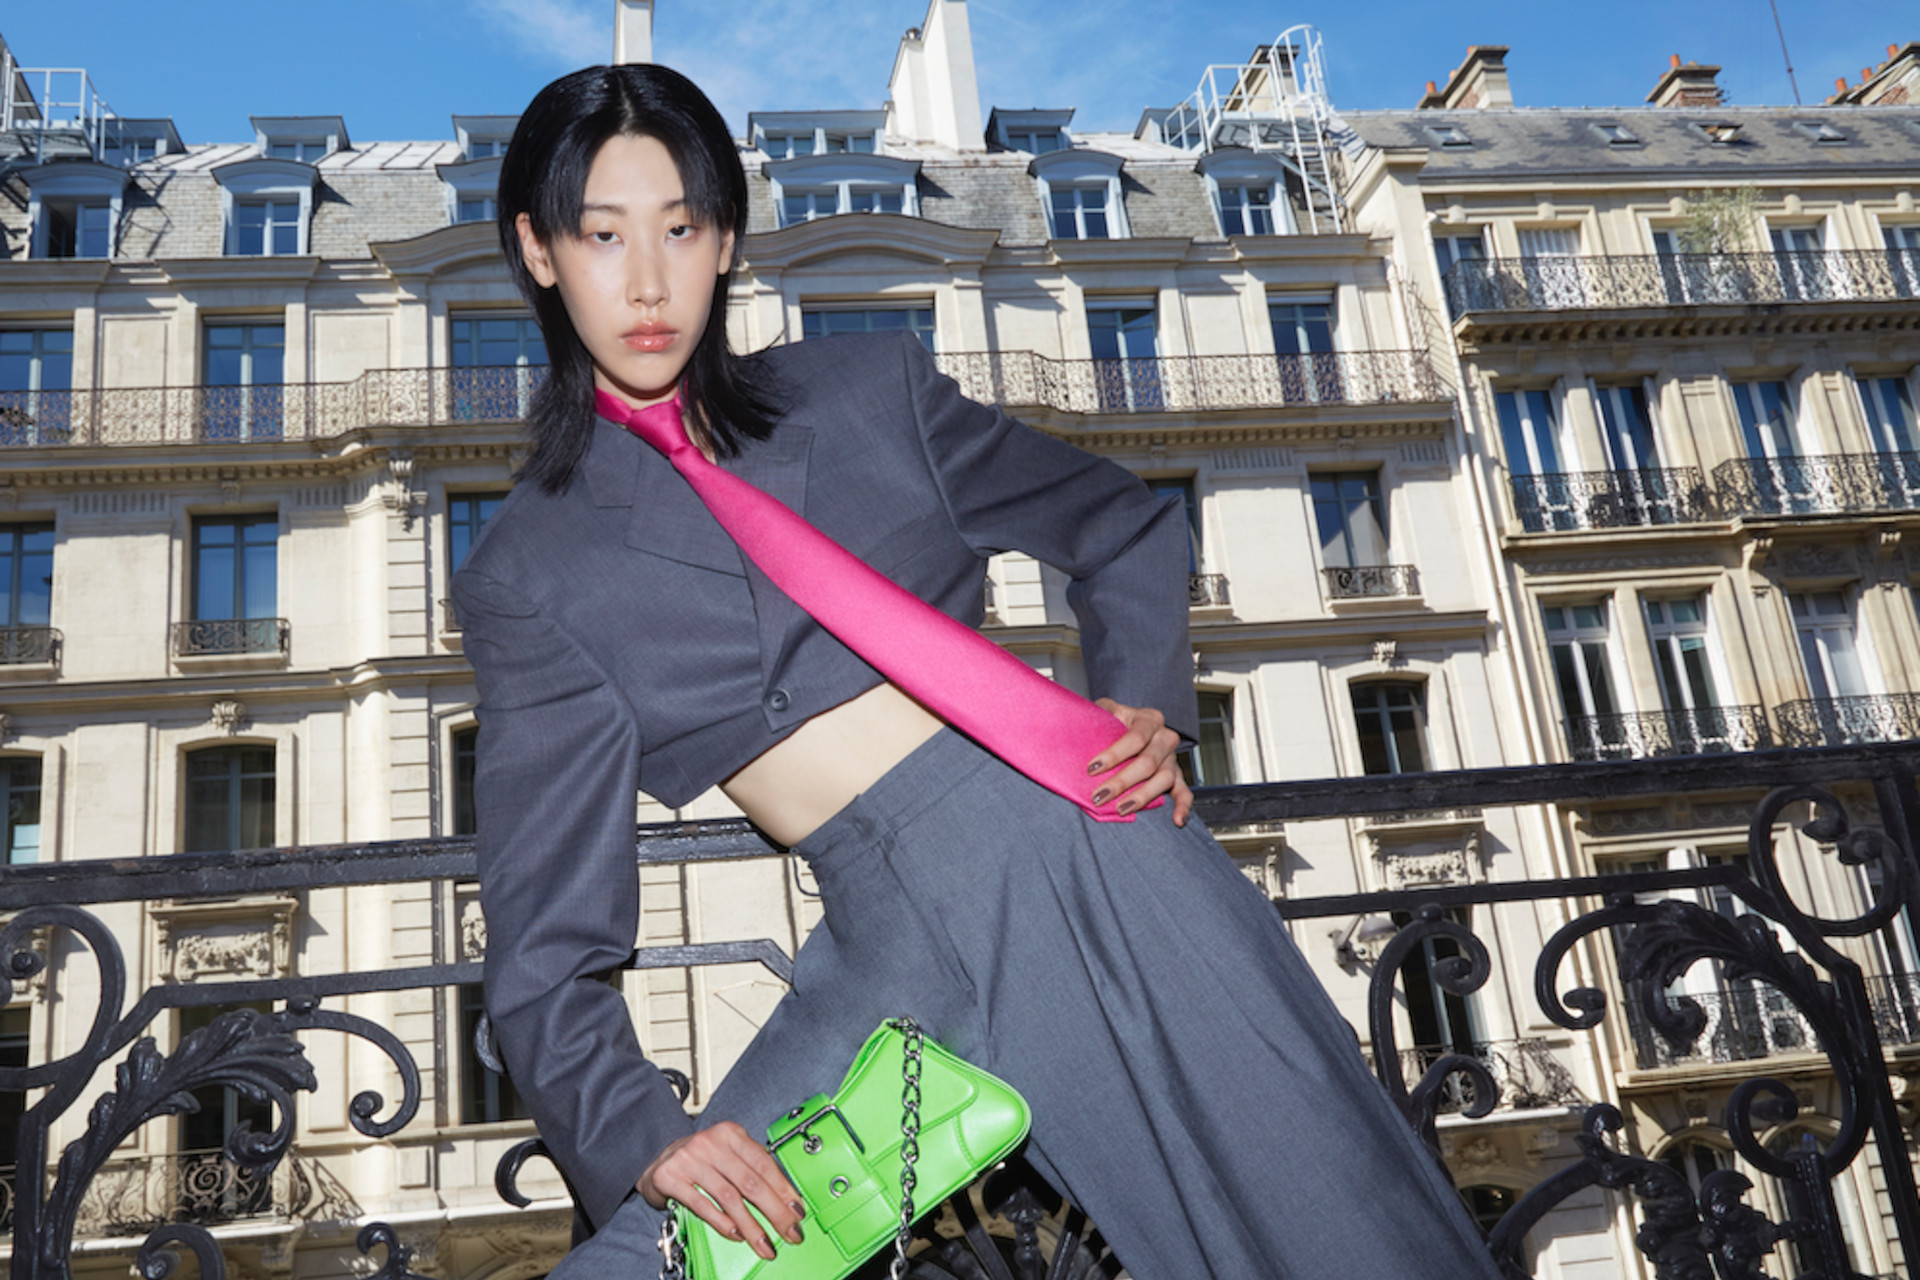 Model in grey cropped suit and pink tie with green handbag leaning on one leg, with Parisian architecture in the background